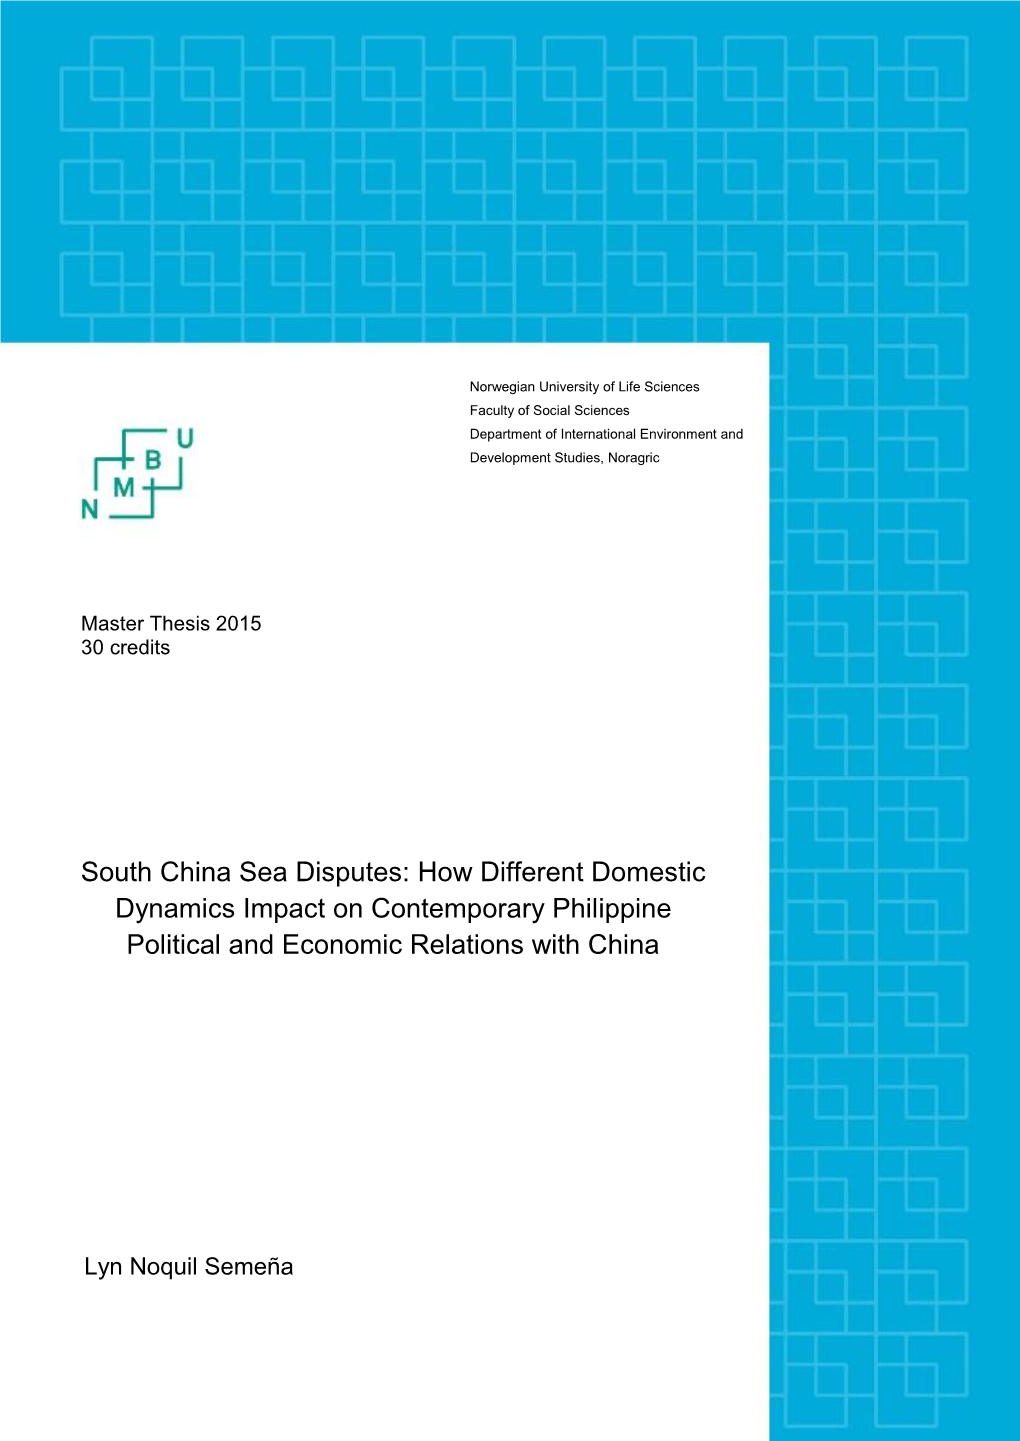 South China Sea Disputes: How Different Domestic Dynamics Impact on Contemporary Philippine Political and Economic Relations with China